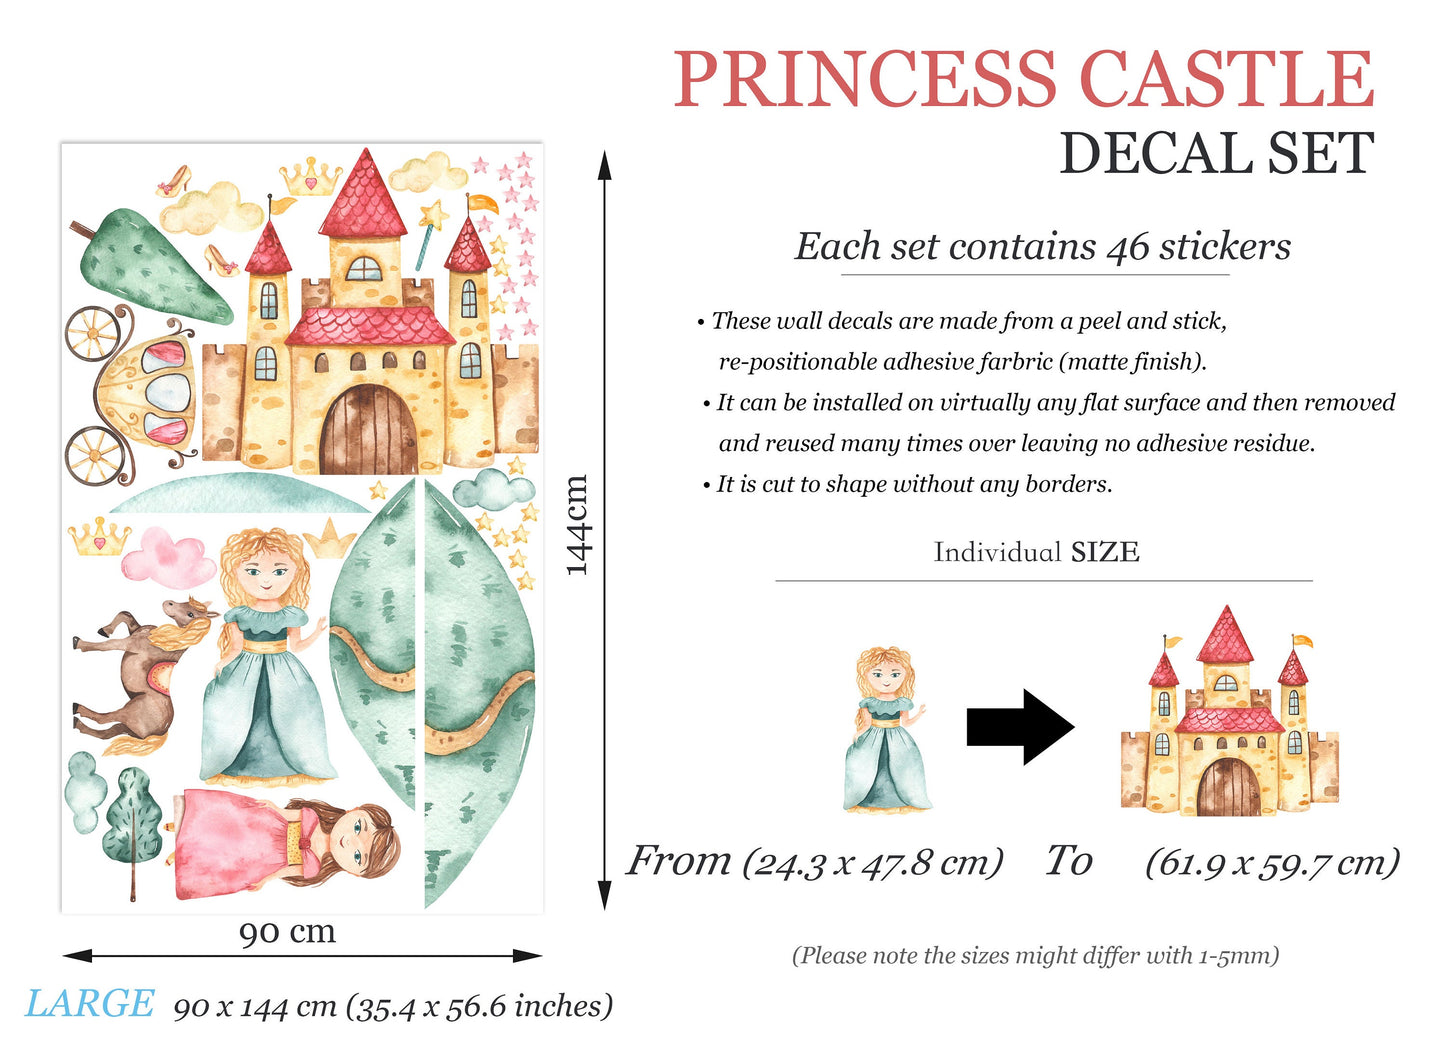 Dreamy Princess Castle and Carriage Wall Decal for Girls' Room - BR313